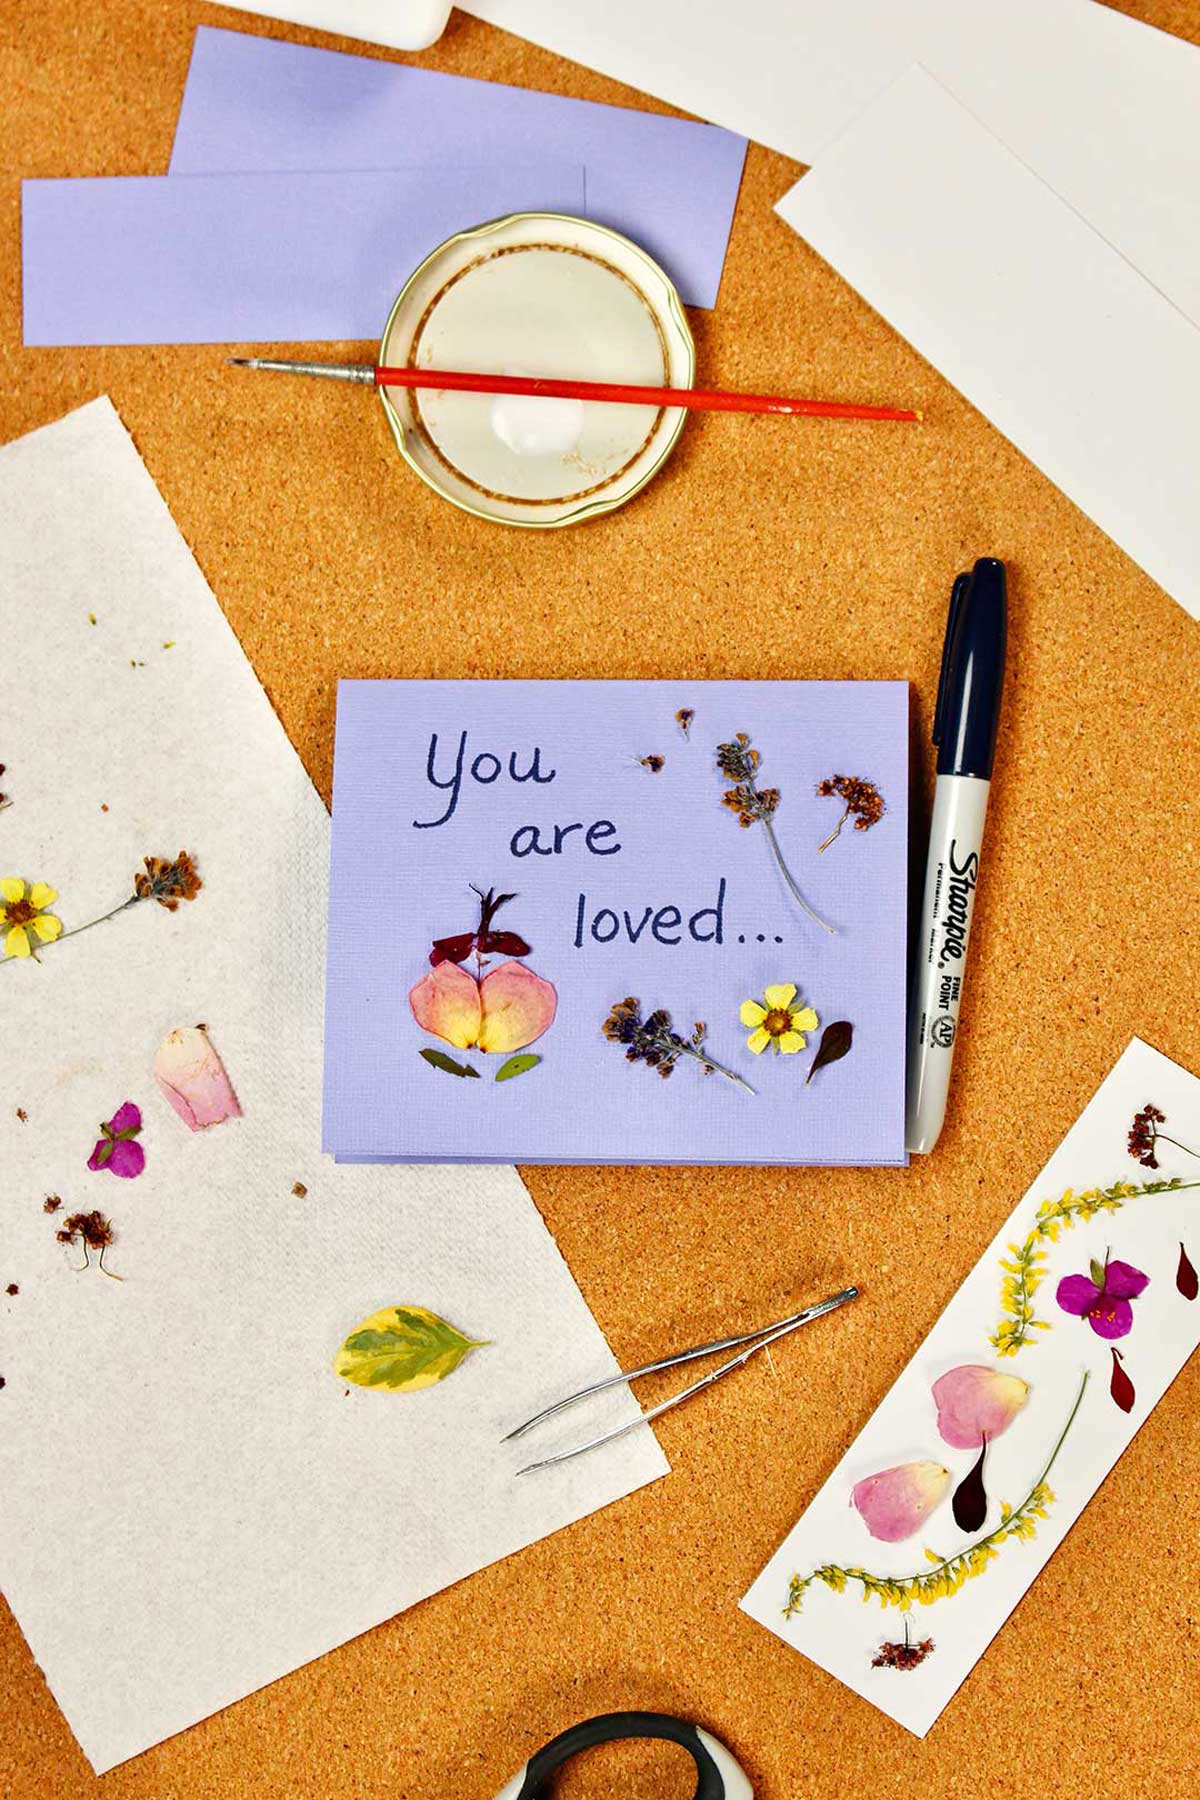 A purple card saying "You are loved..." with pressed flowers on it as well as a bookmark with pressed flowers.